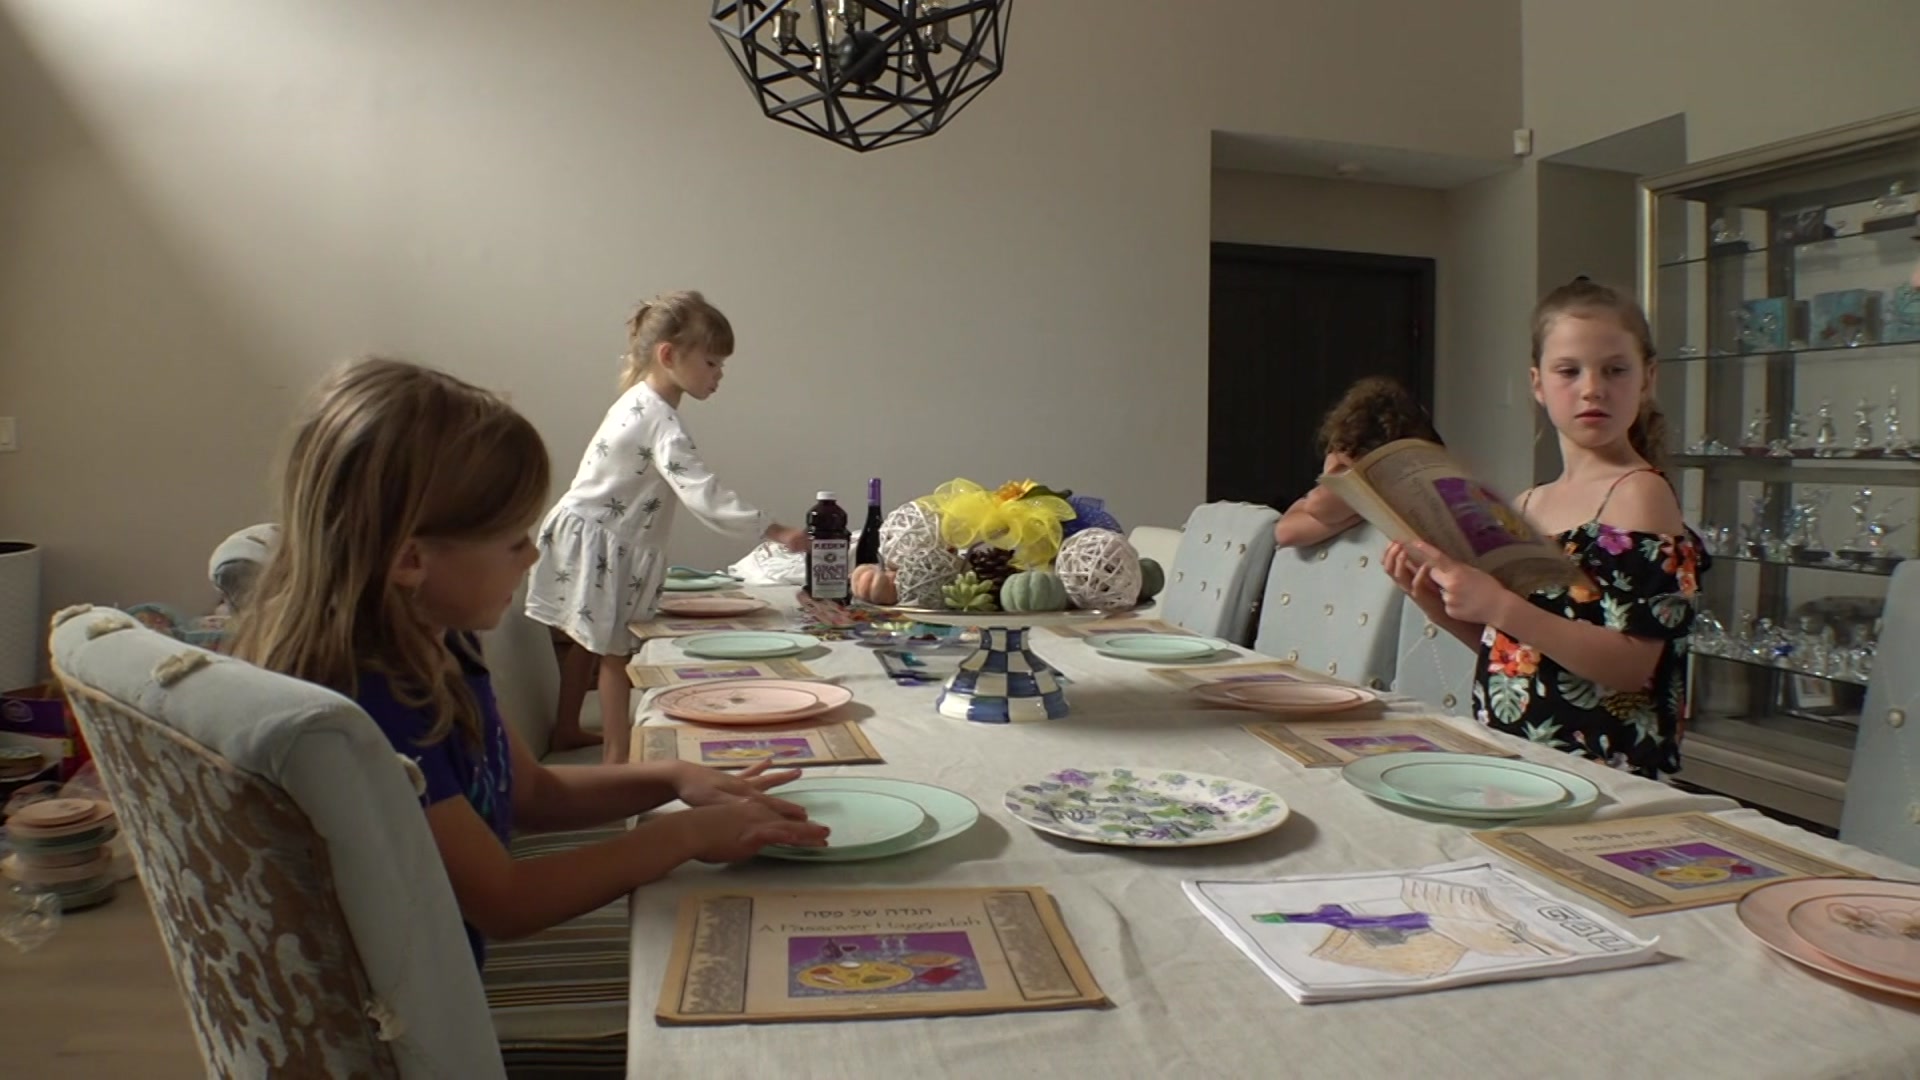 South Florida Family Celebrates Passover With Ukrainian Family Displaced By War